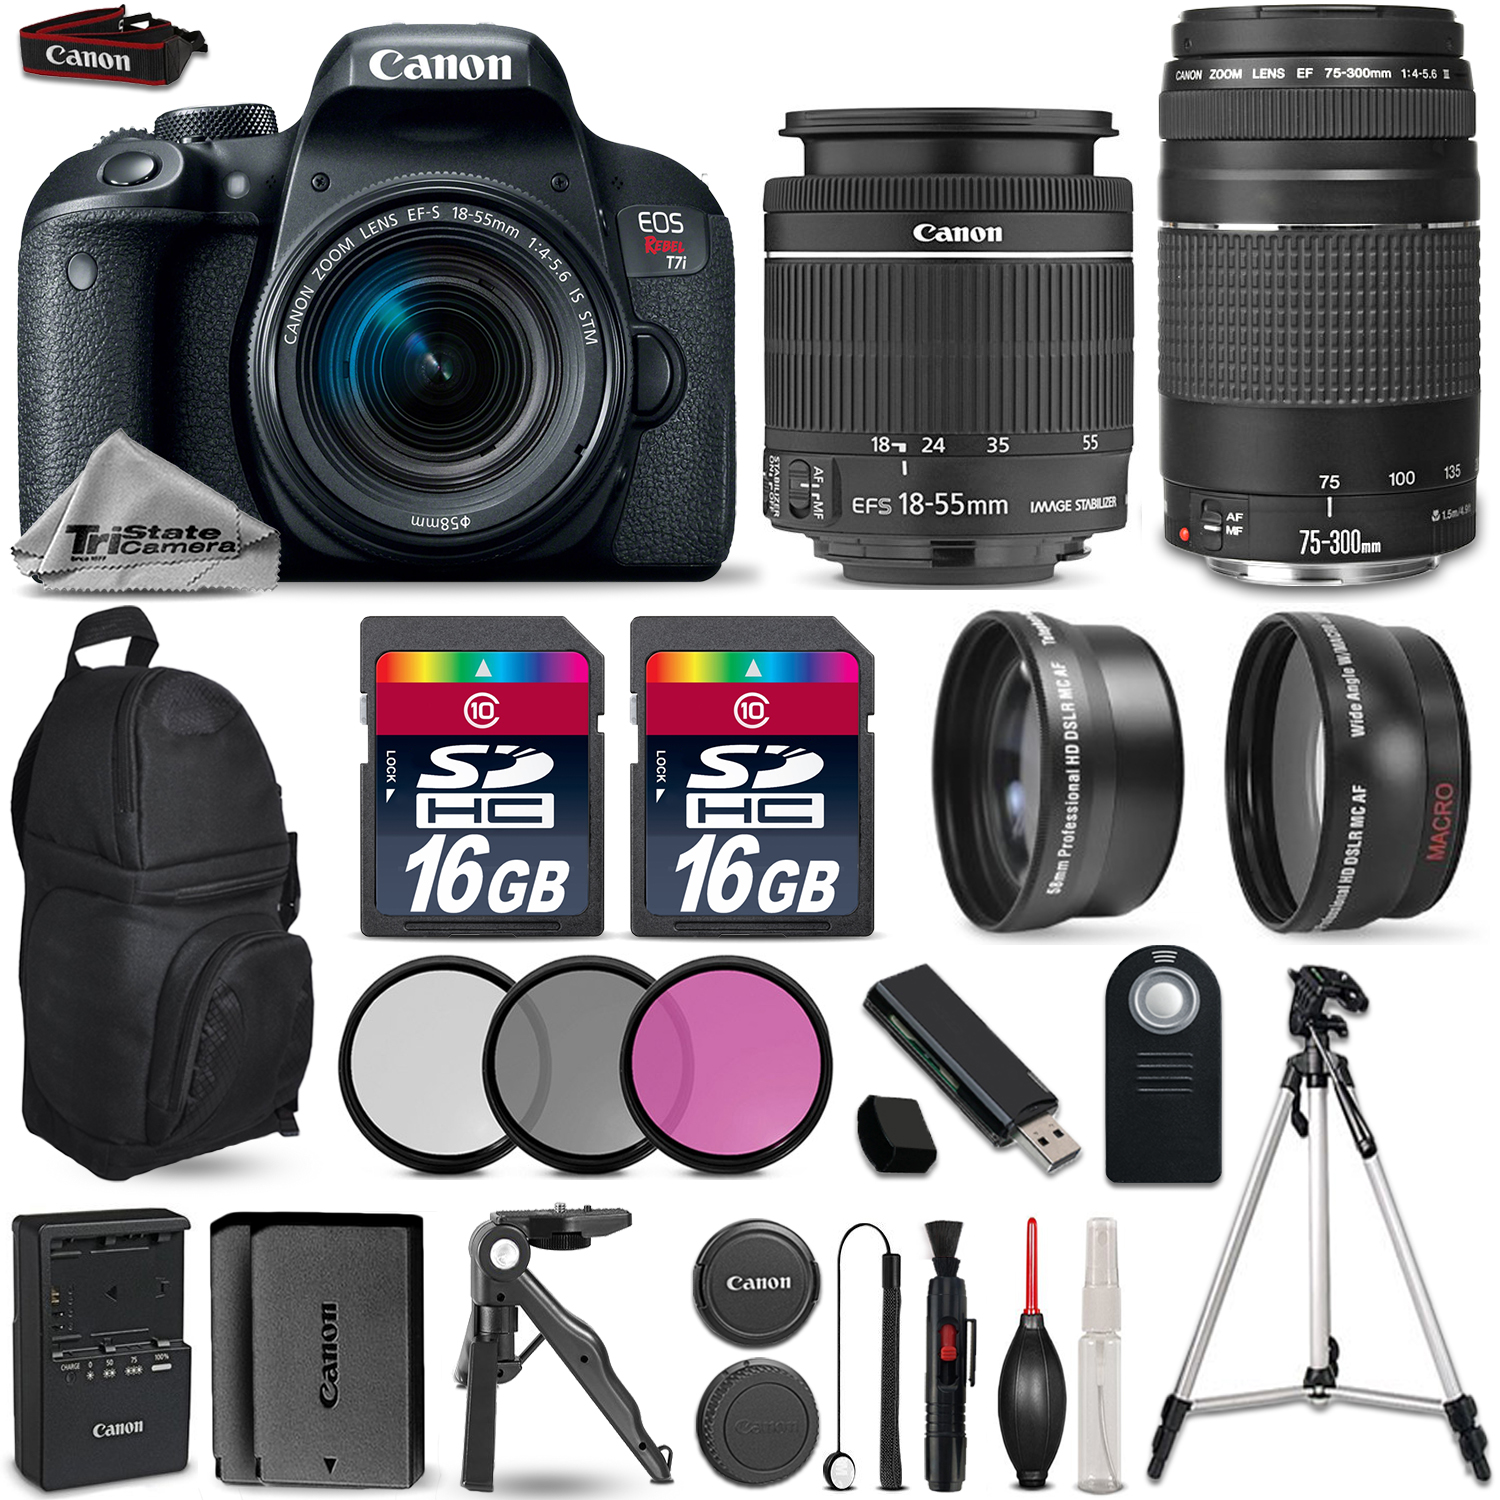 EOS Rebel T7i Camera + 18-55mm STM + 75-300mm + EXT BAT + Backpack + 32GB *FREE SHIPPING*